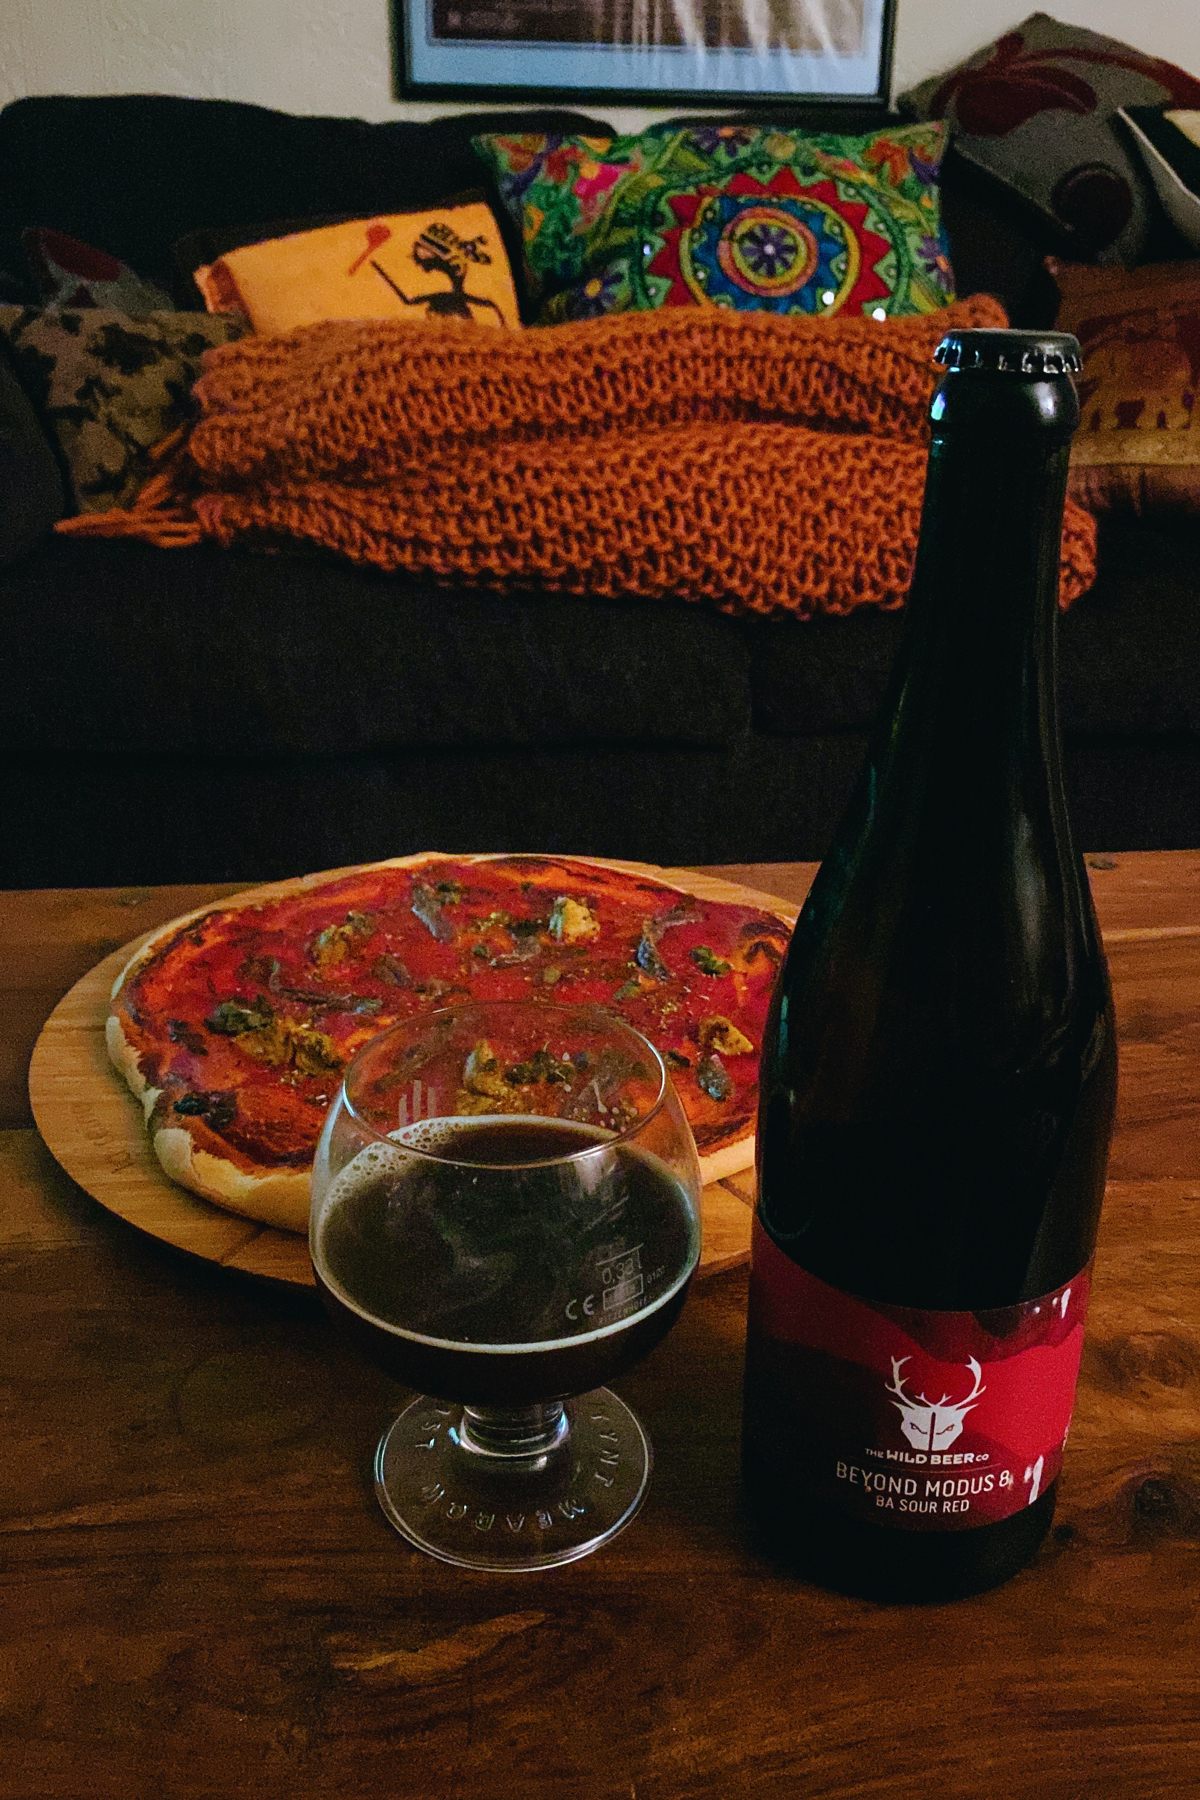 Glass and bottle of dark beer on a table in front of a pizza